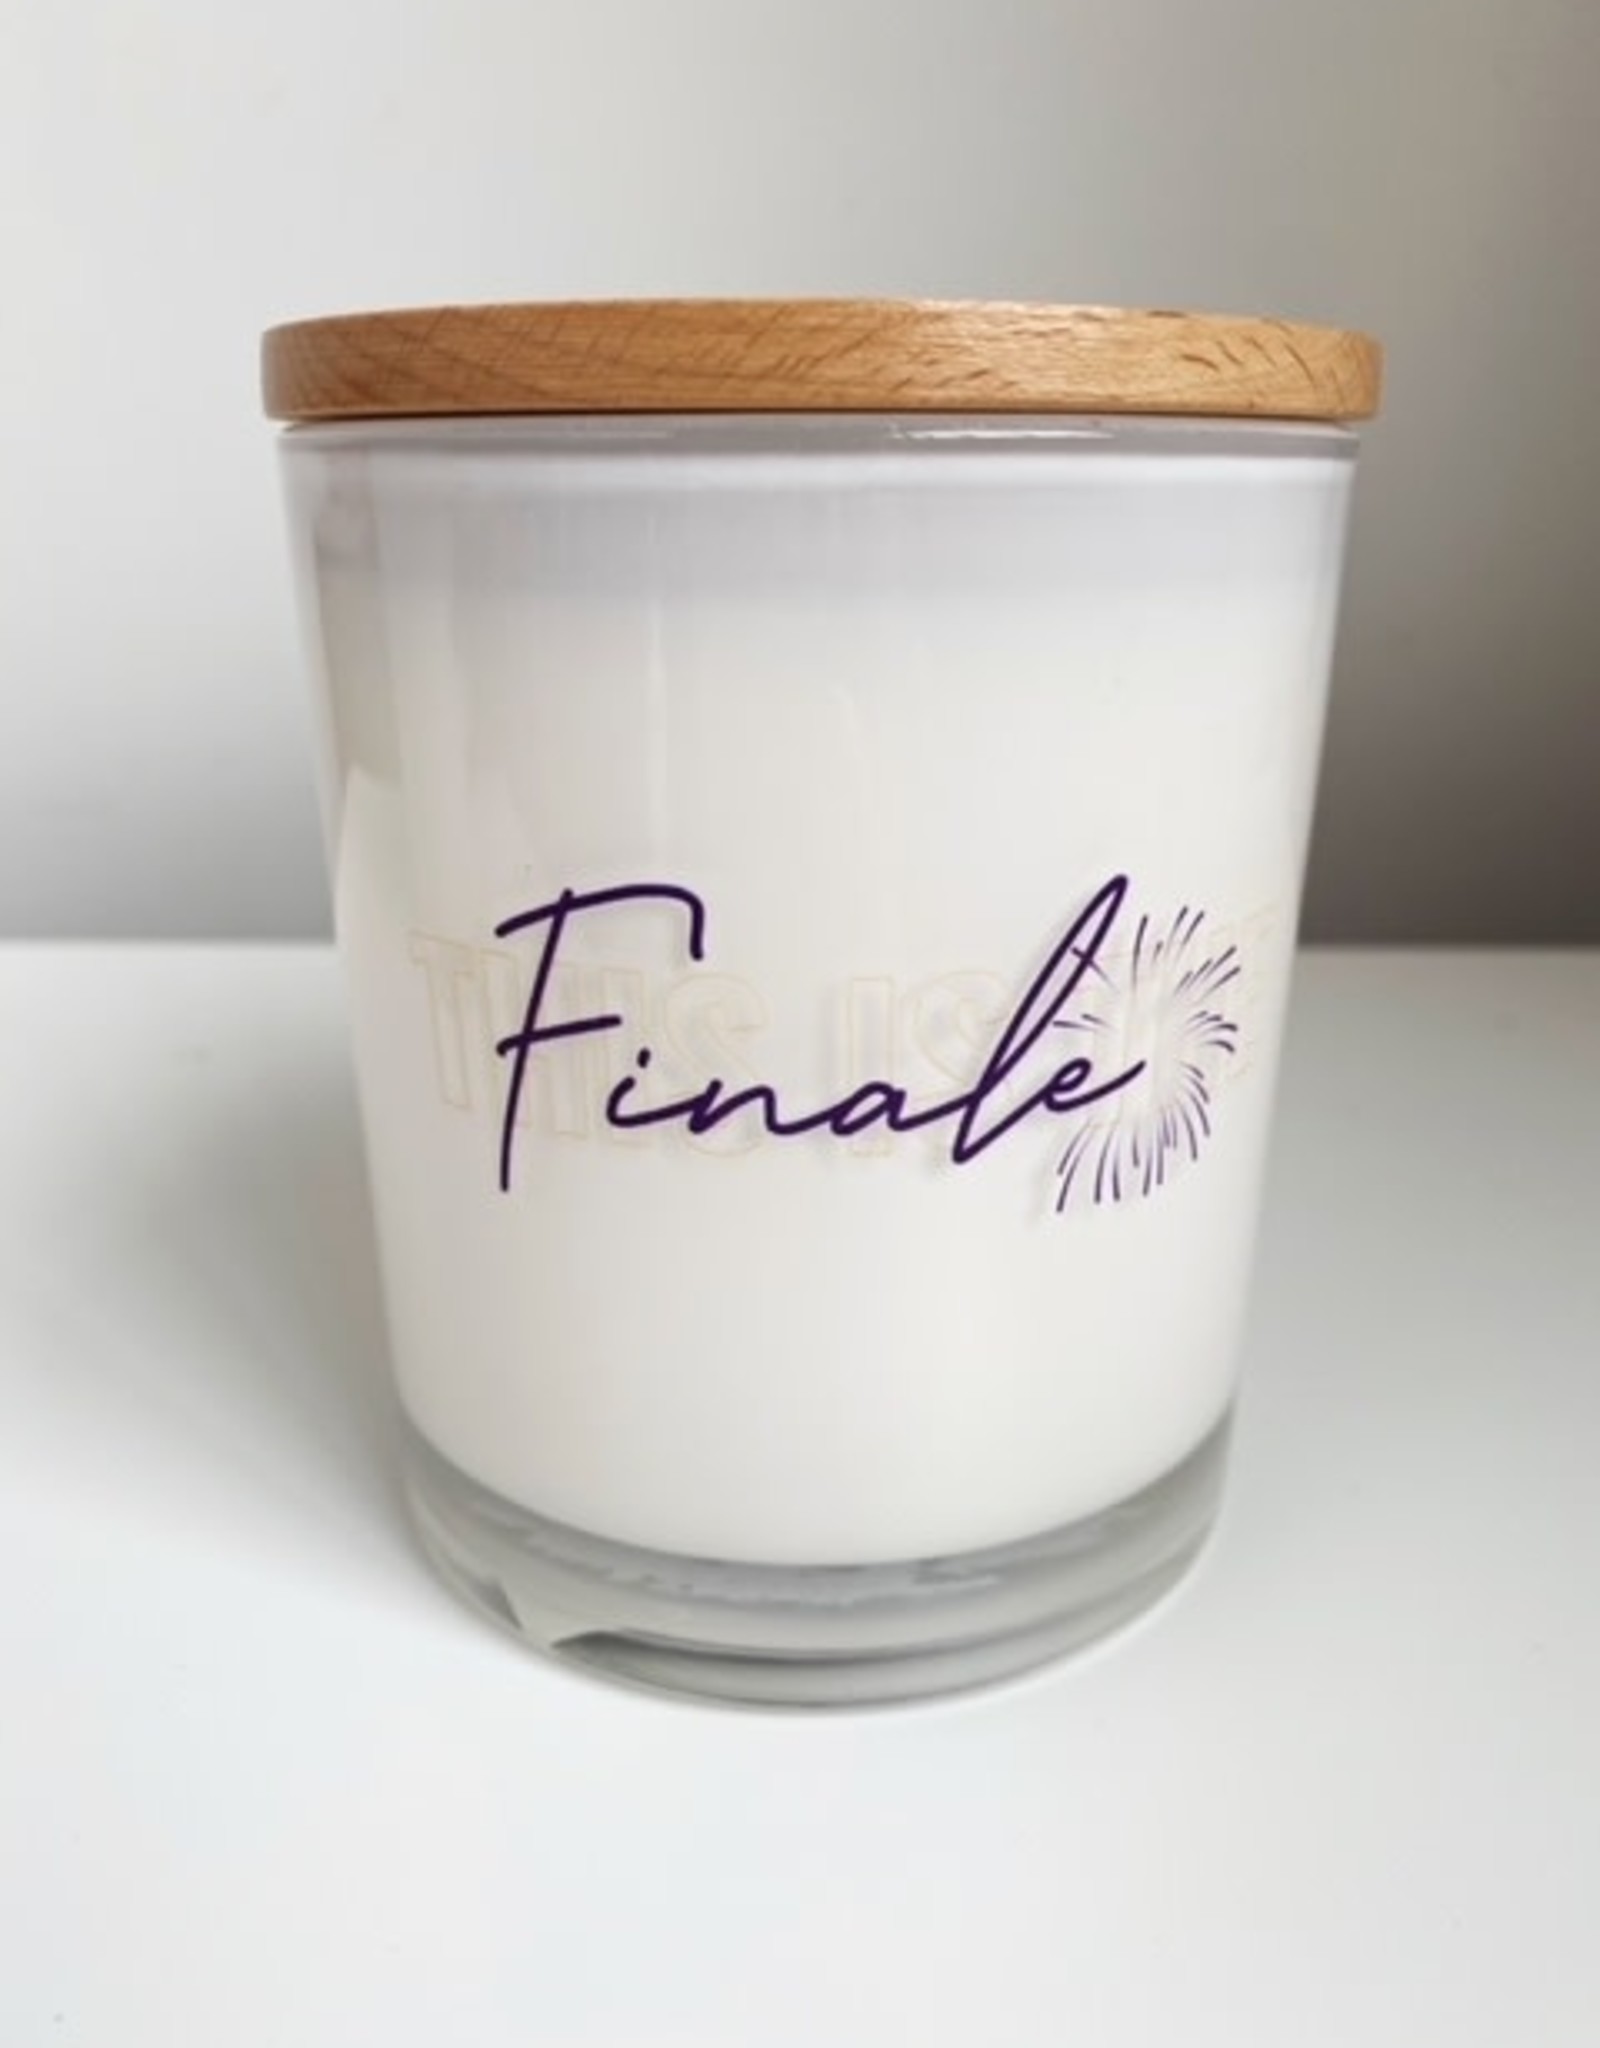 This is the Finale Candle